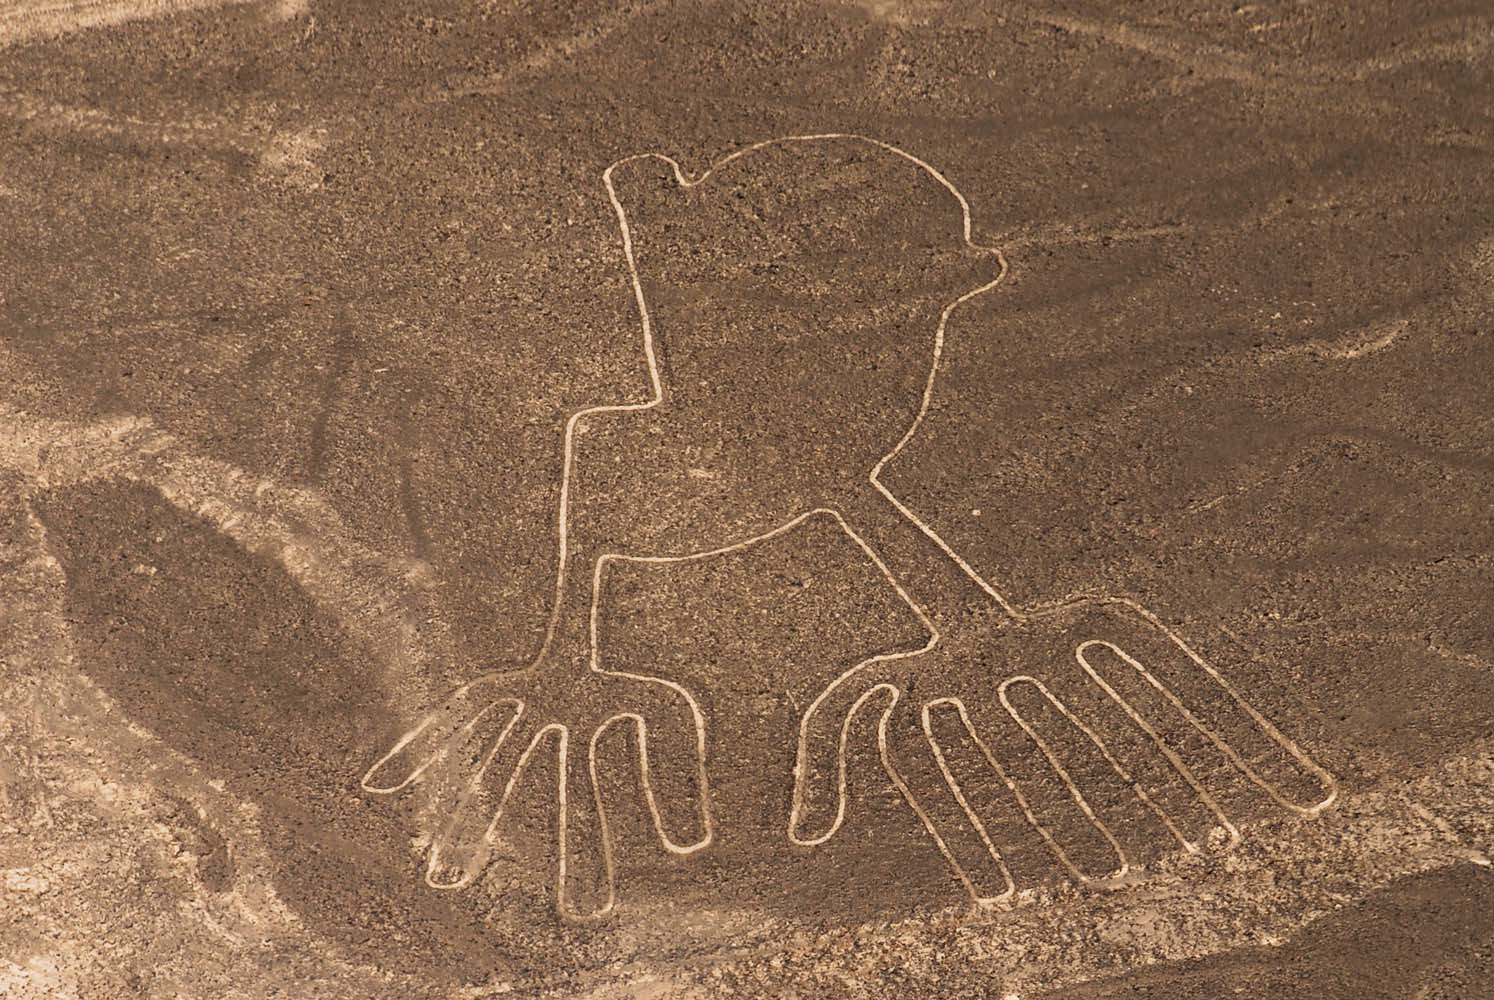 Nazca wallpapers, Vehicles, HQ Nazca pictures | 4K Wallpapers 2019